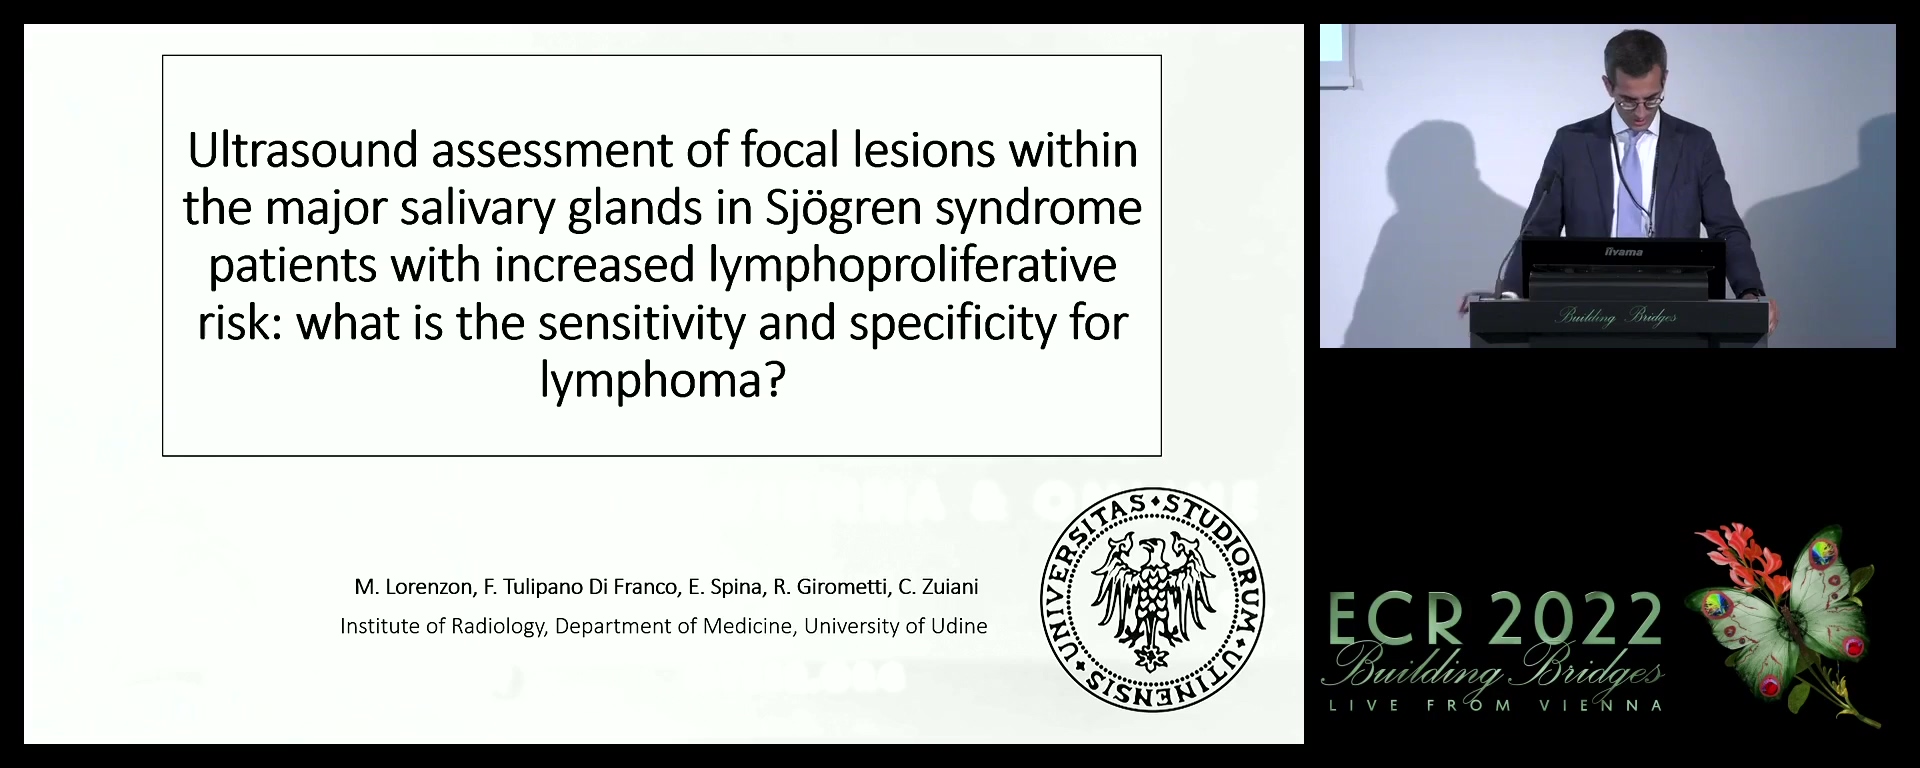 Ultrasound assessment of focal lesions within the major salivary glands in Sjögren syndrome patients with increased lymphoproliferative risk: what is the sensitivity and specificity for lymphoma? - Michele Lorenzon, Udine / IT